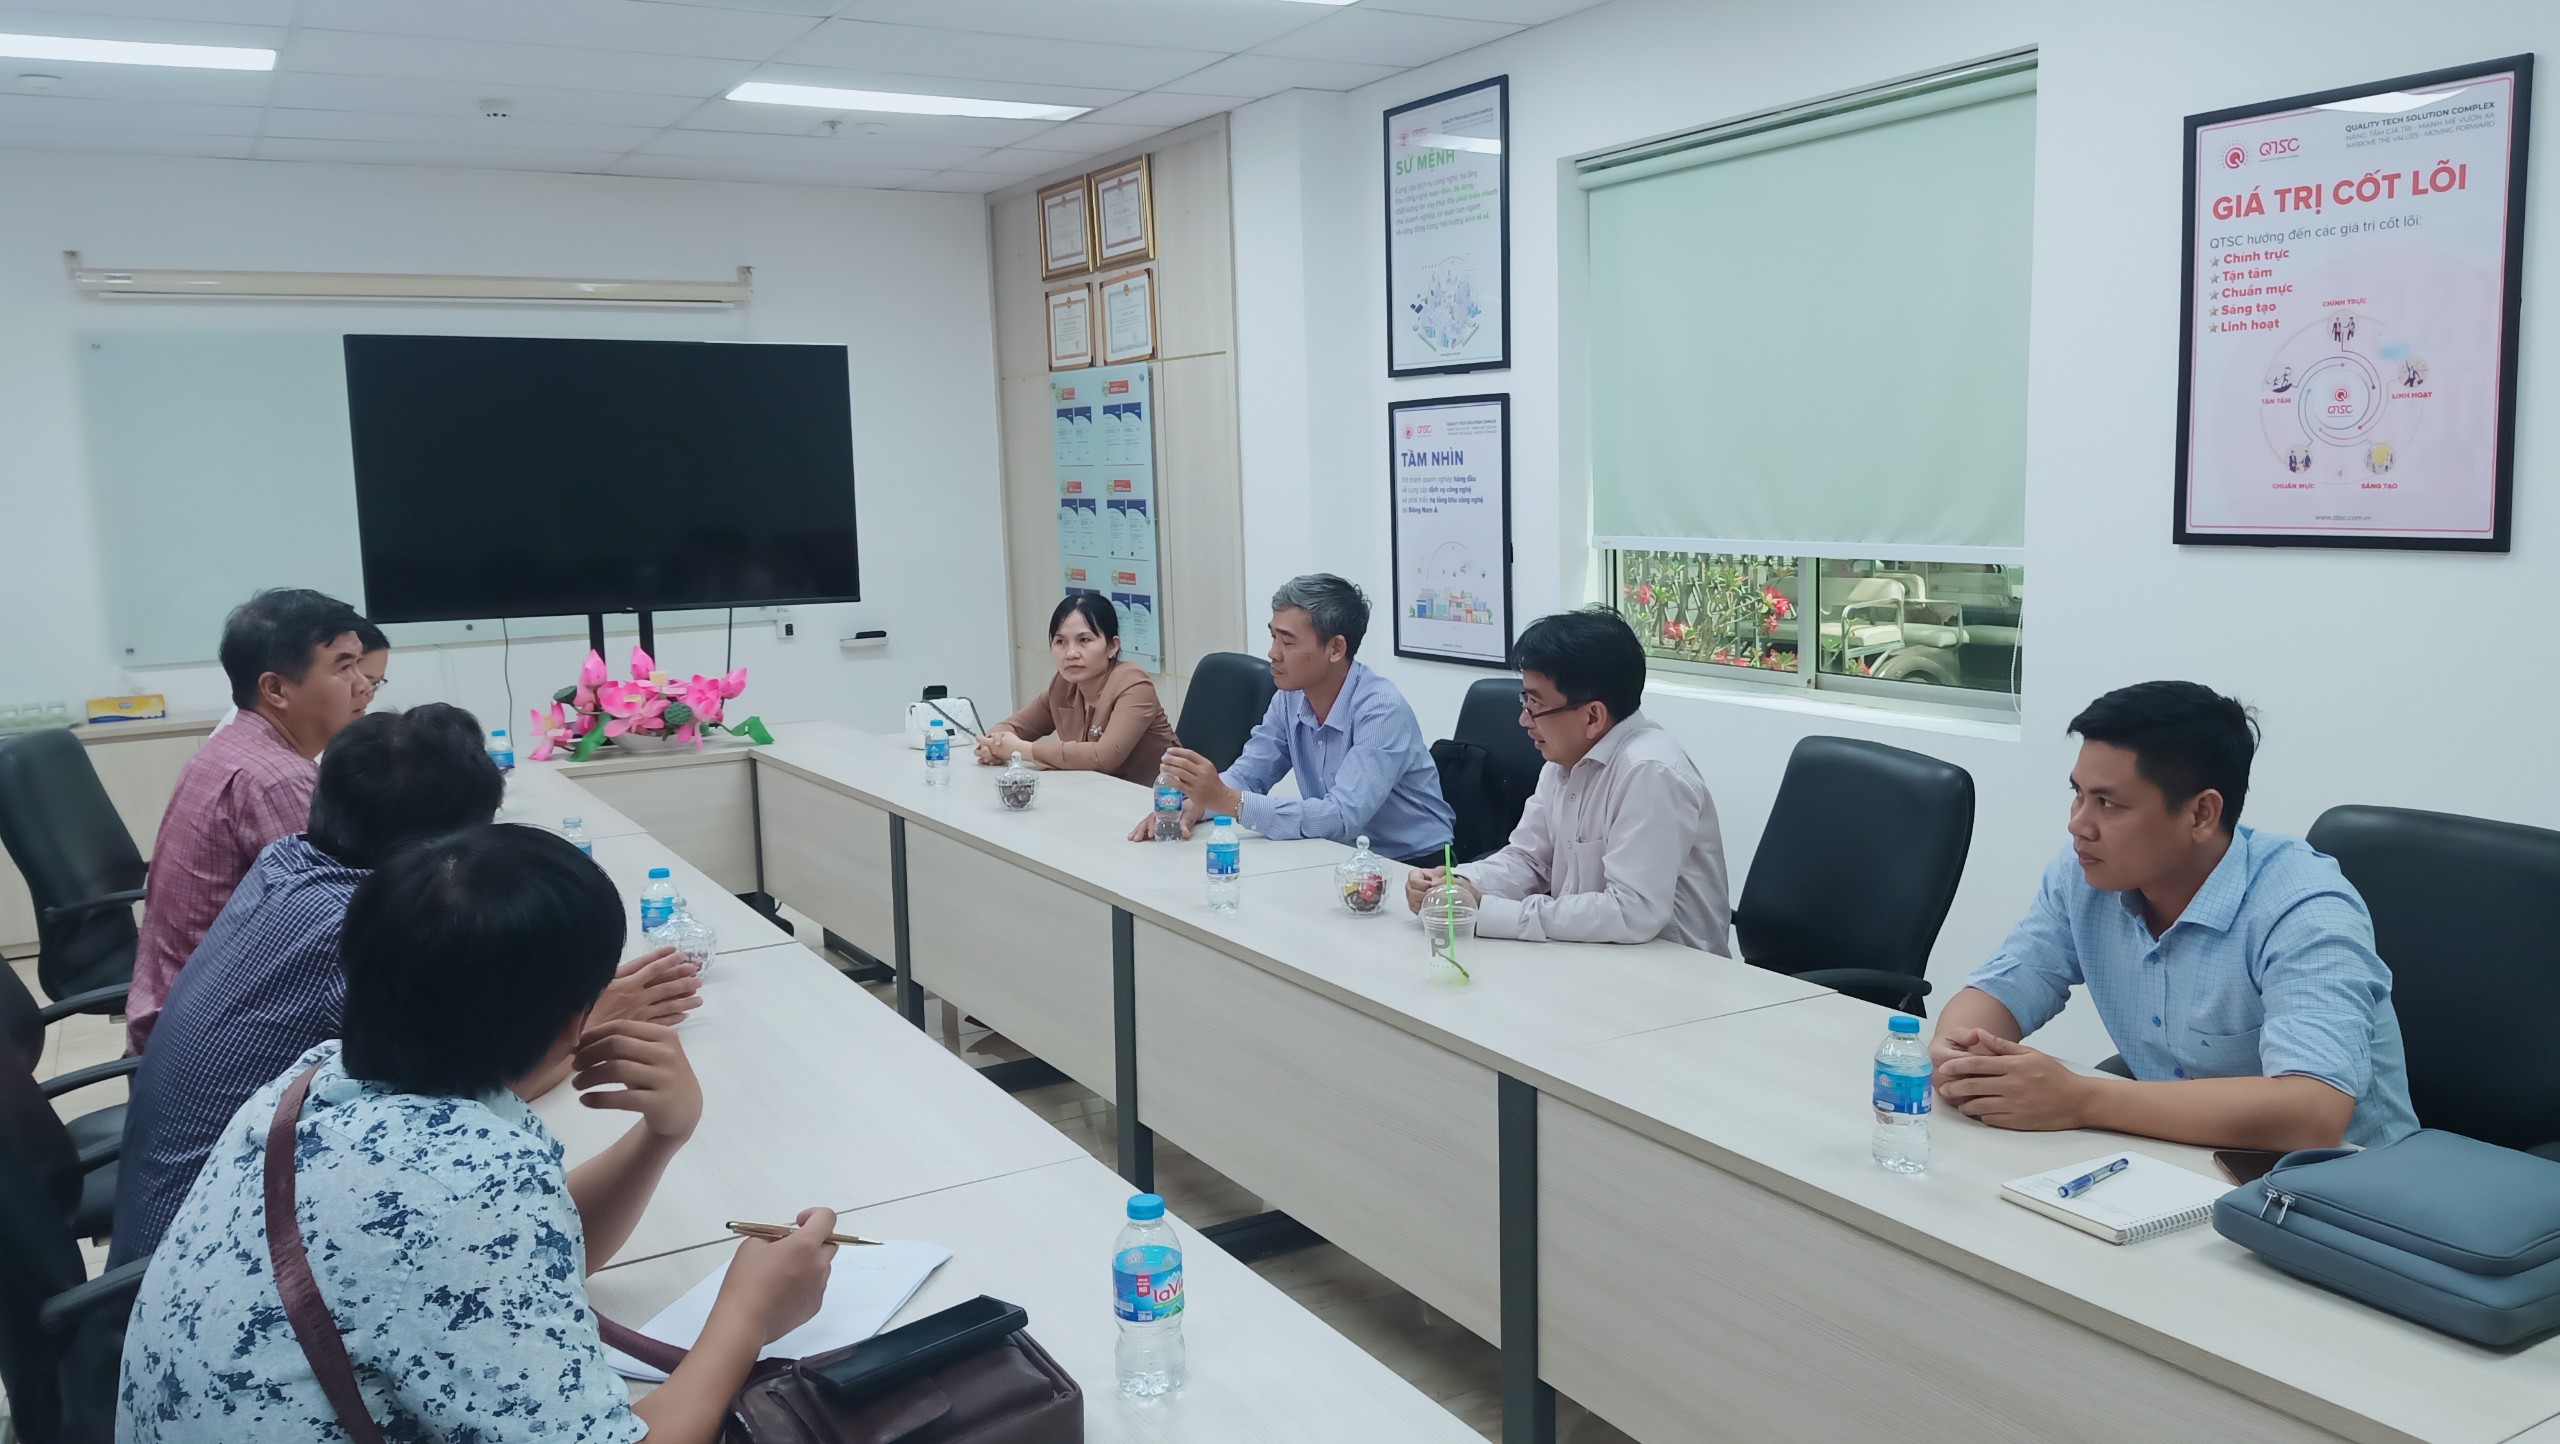 The delegation of Hau Giang province learned about QTSC model